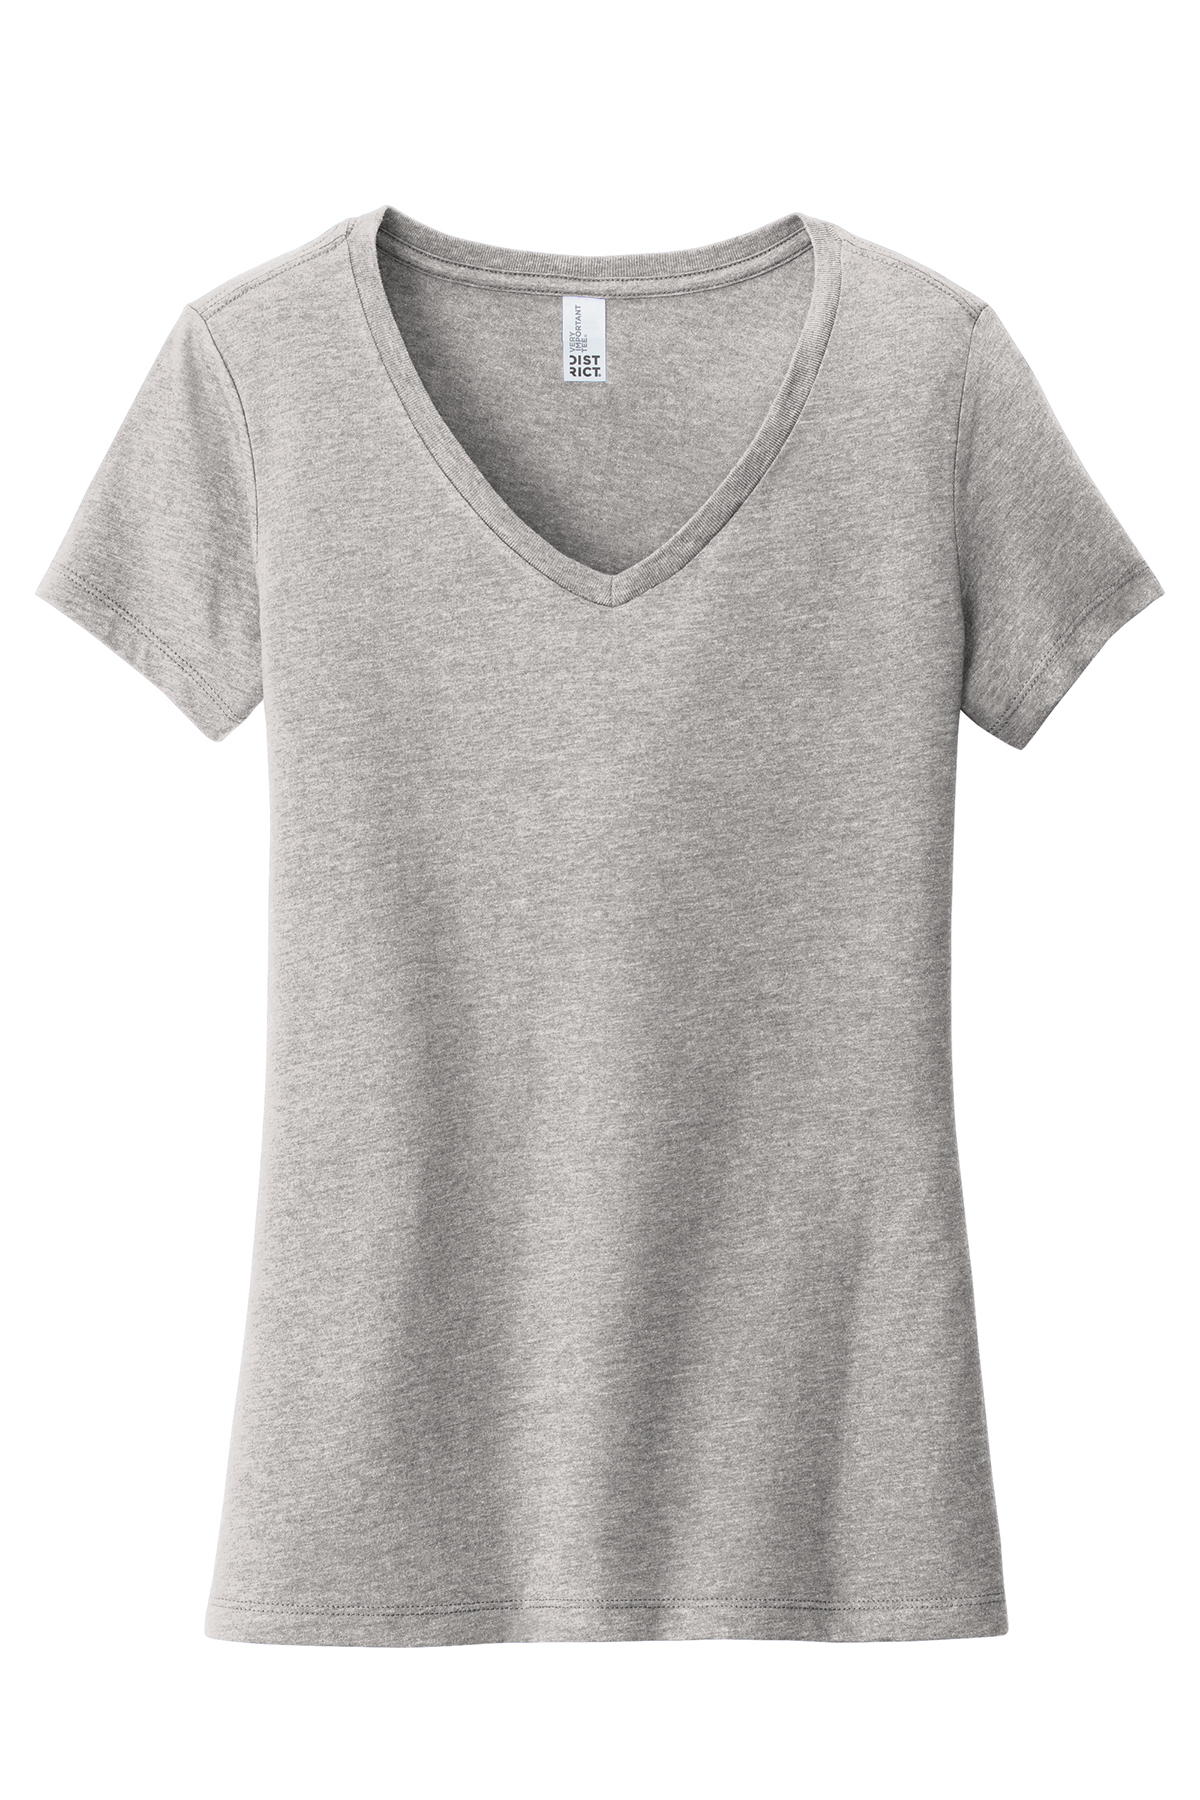 District Women’s Very Important Tee V-Neck | Product | District